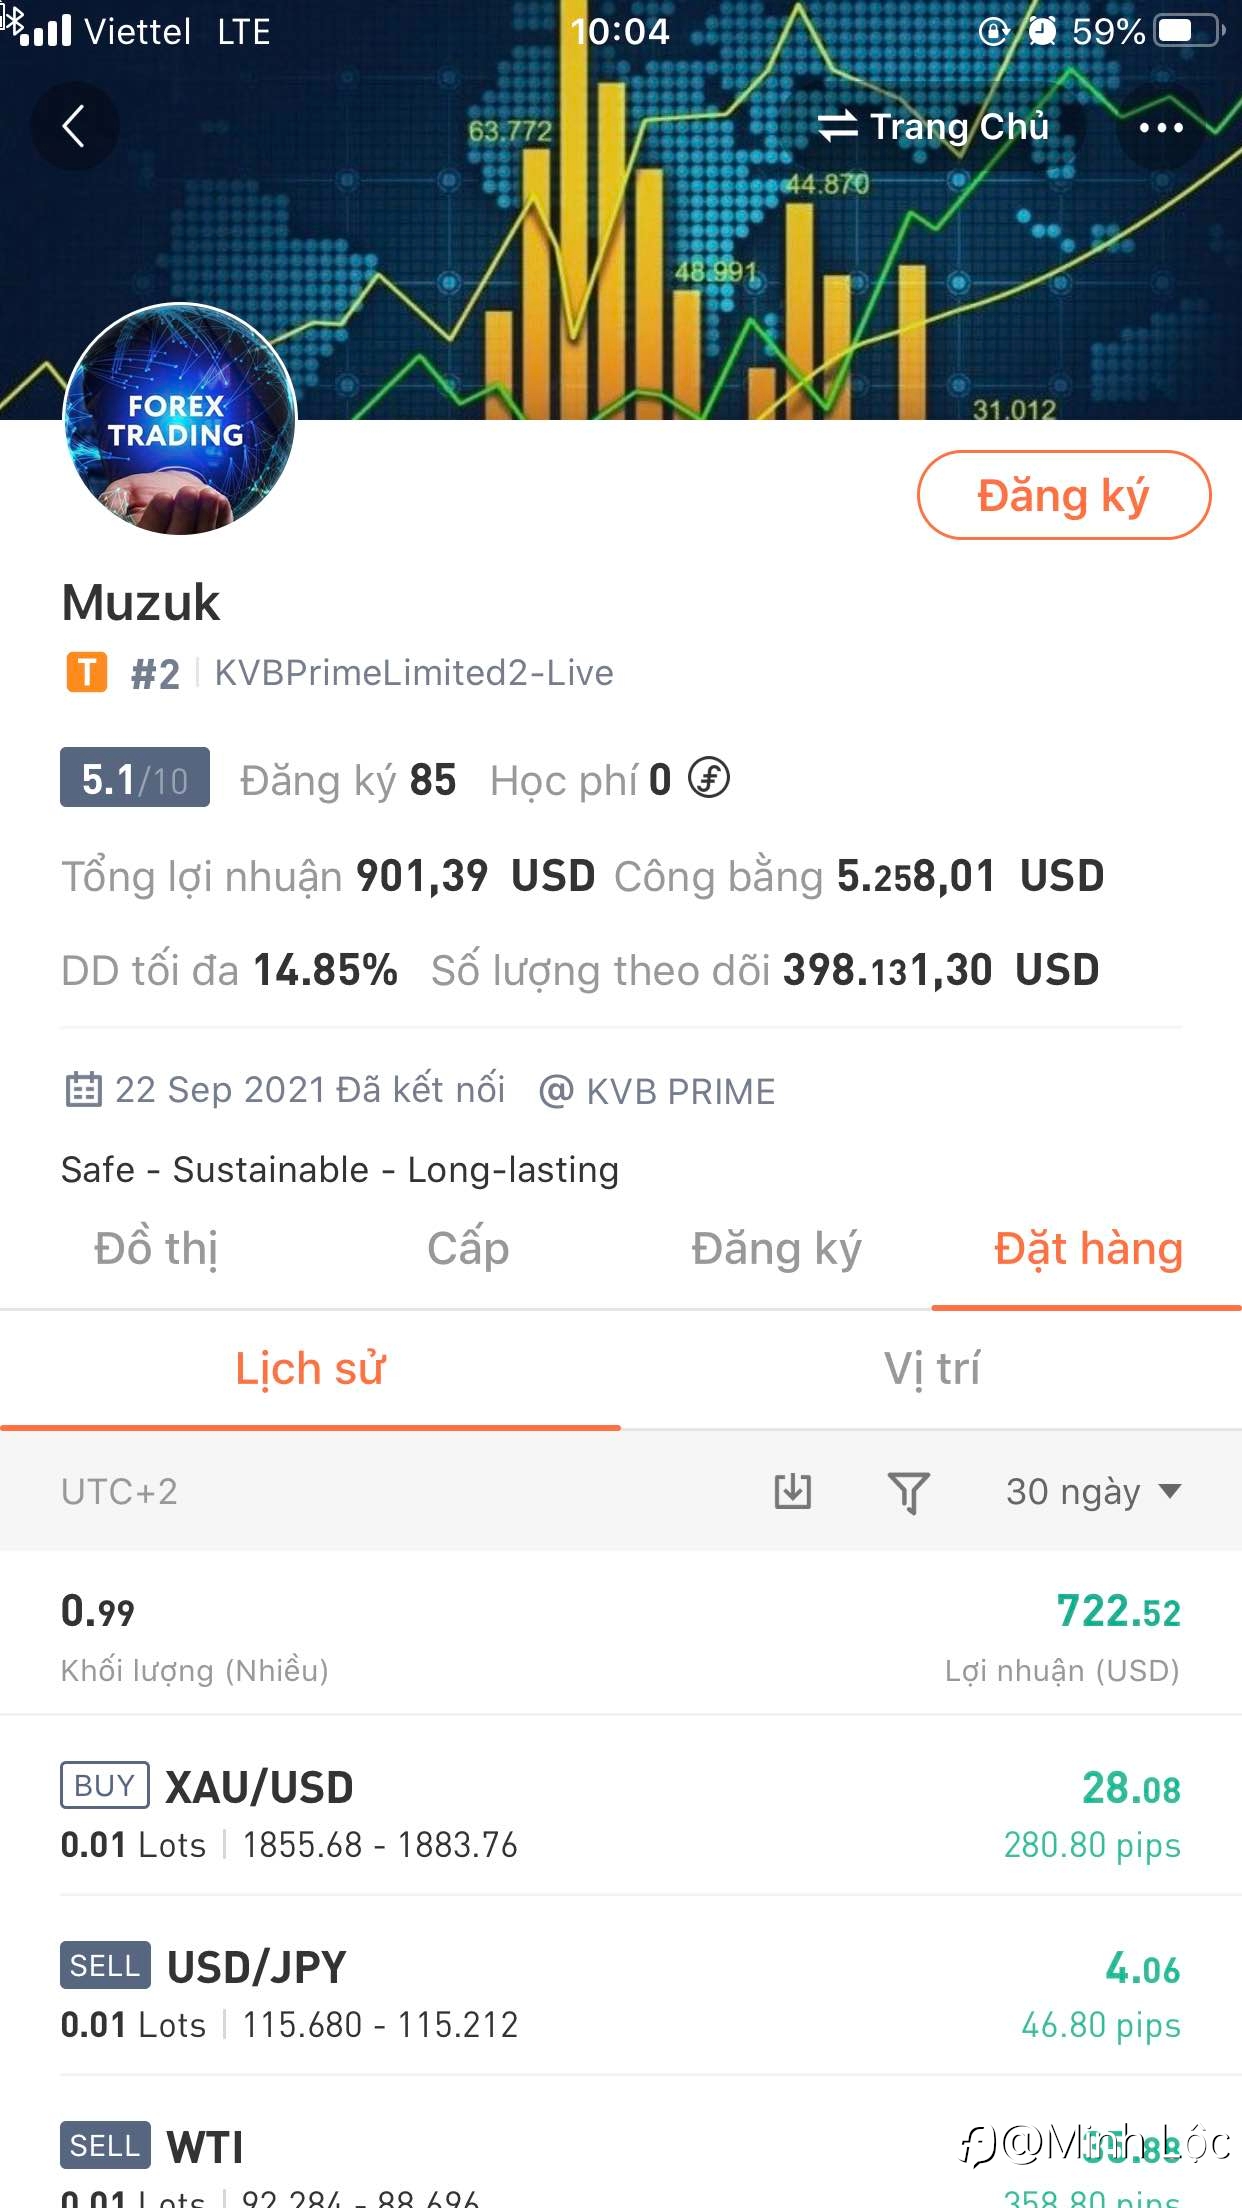 Muzuk!!Follow his account and have good strategy to invest!